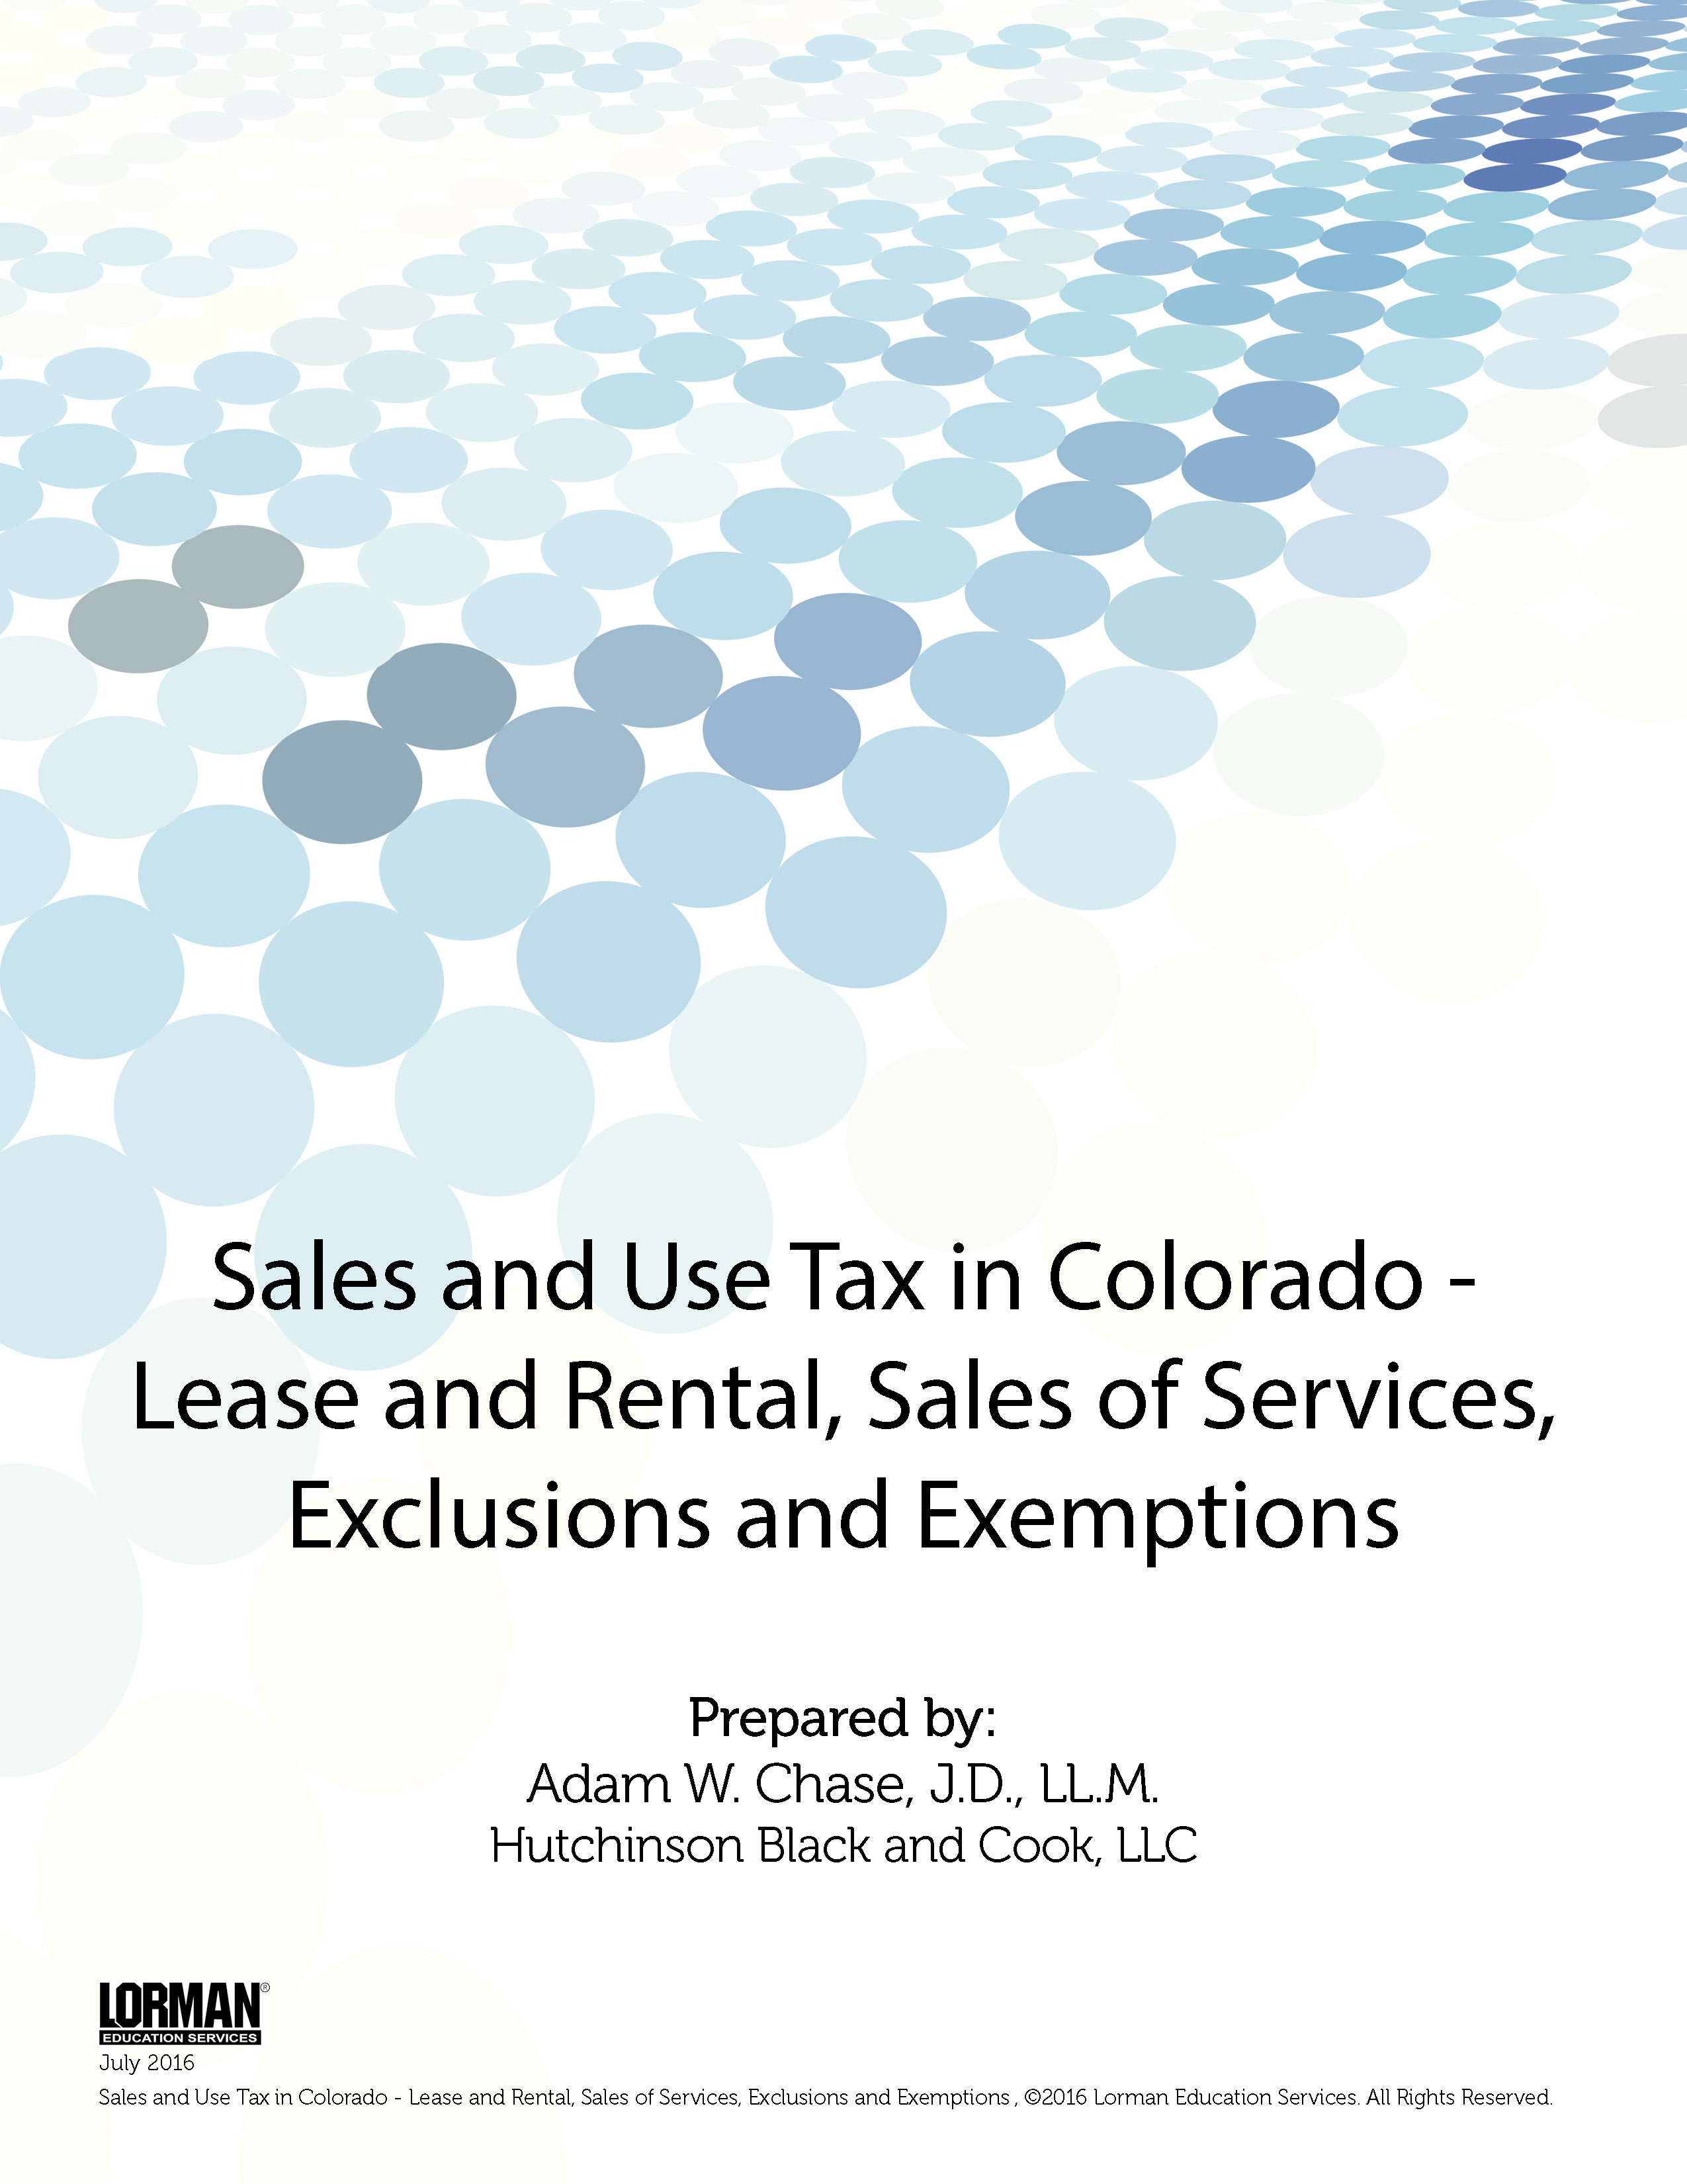 Sales and Use Tax in Colorado - Lease and Rental, Sales of Services, Exclusions and Exemptions 